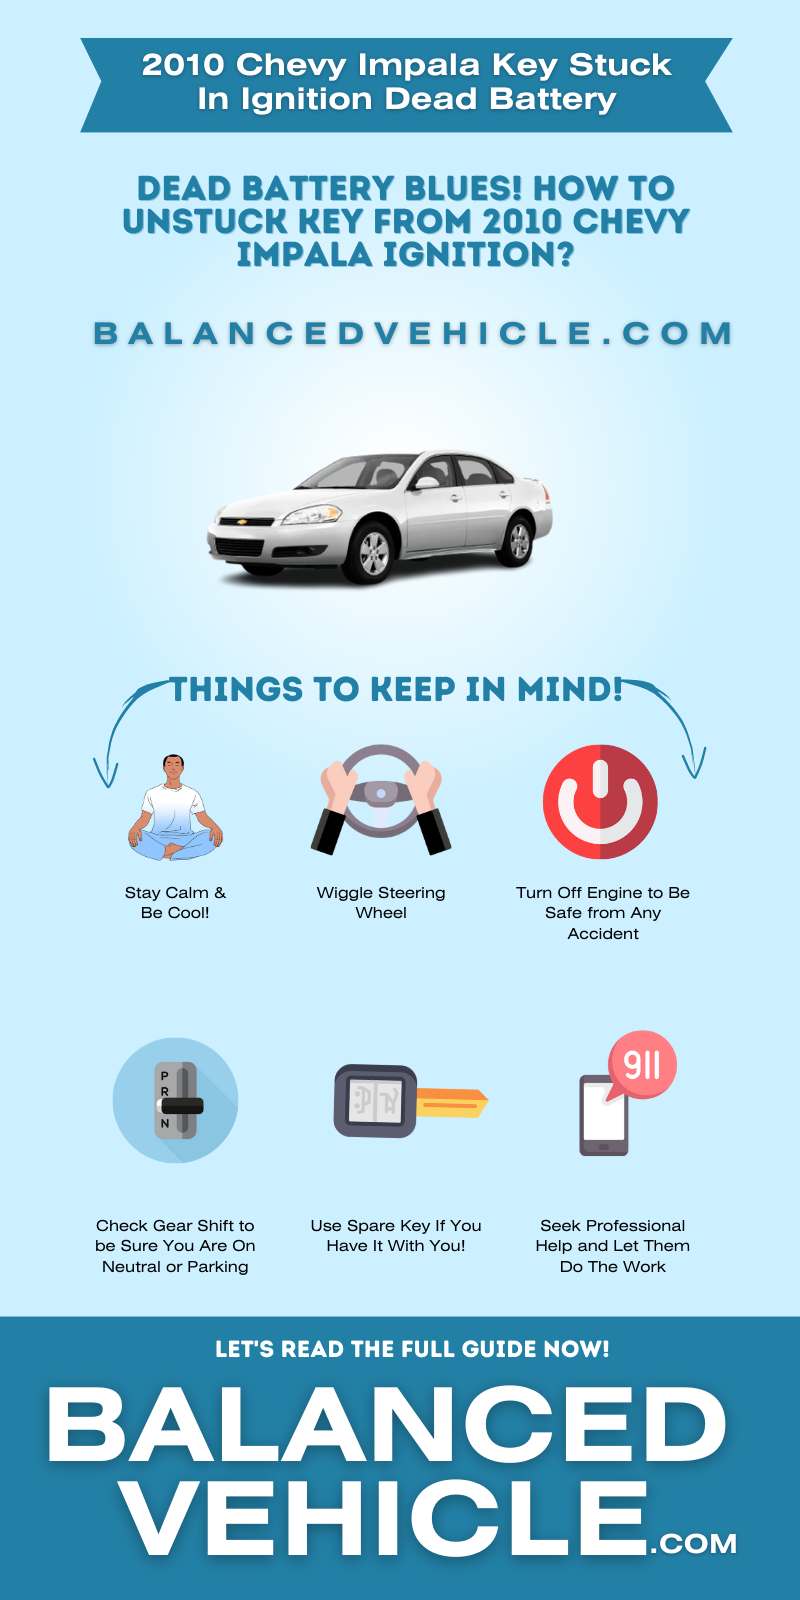 2010 Chevy Impala Key Stuck In Ignition Dead Battery- Infographic 